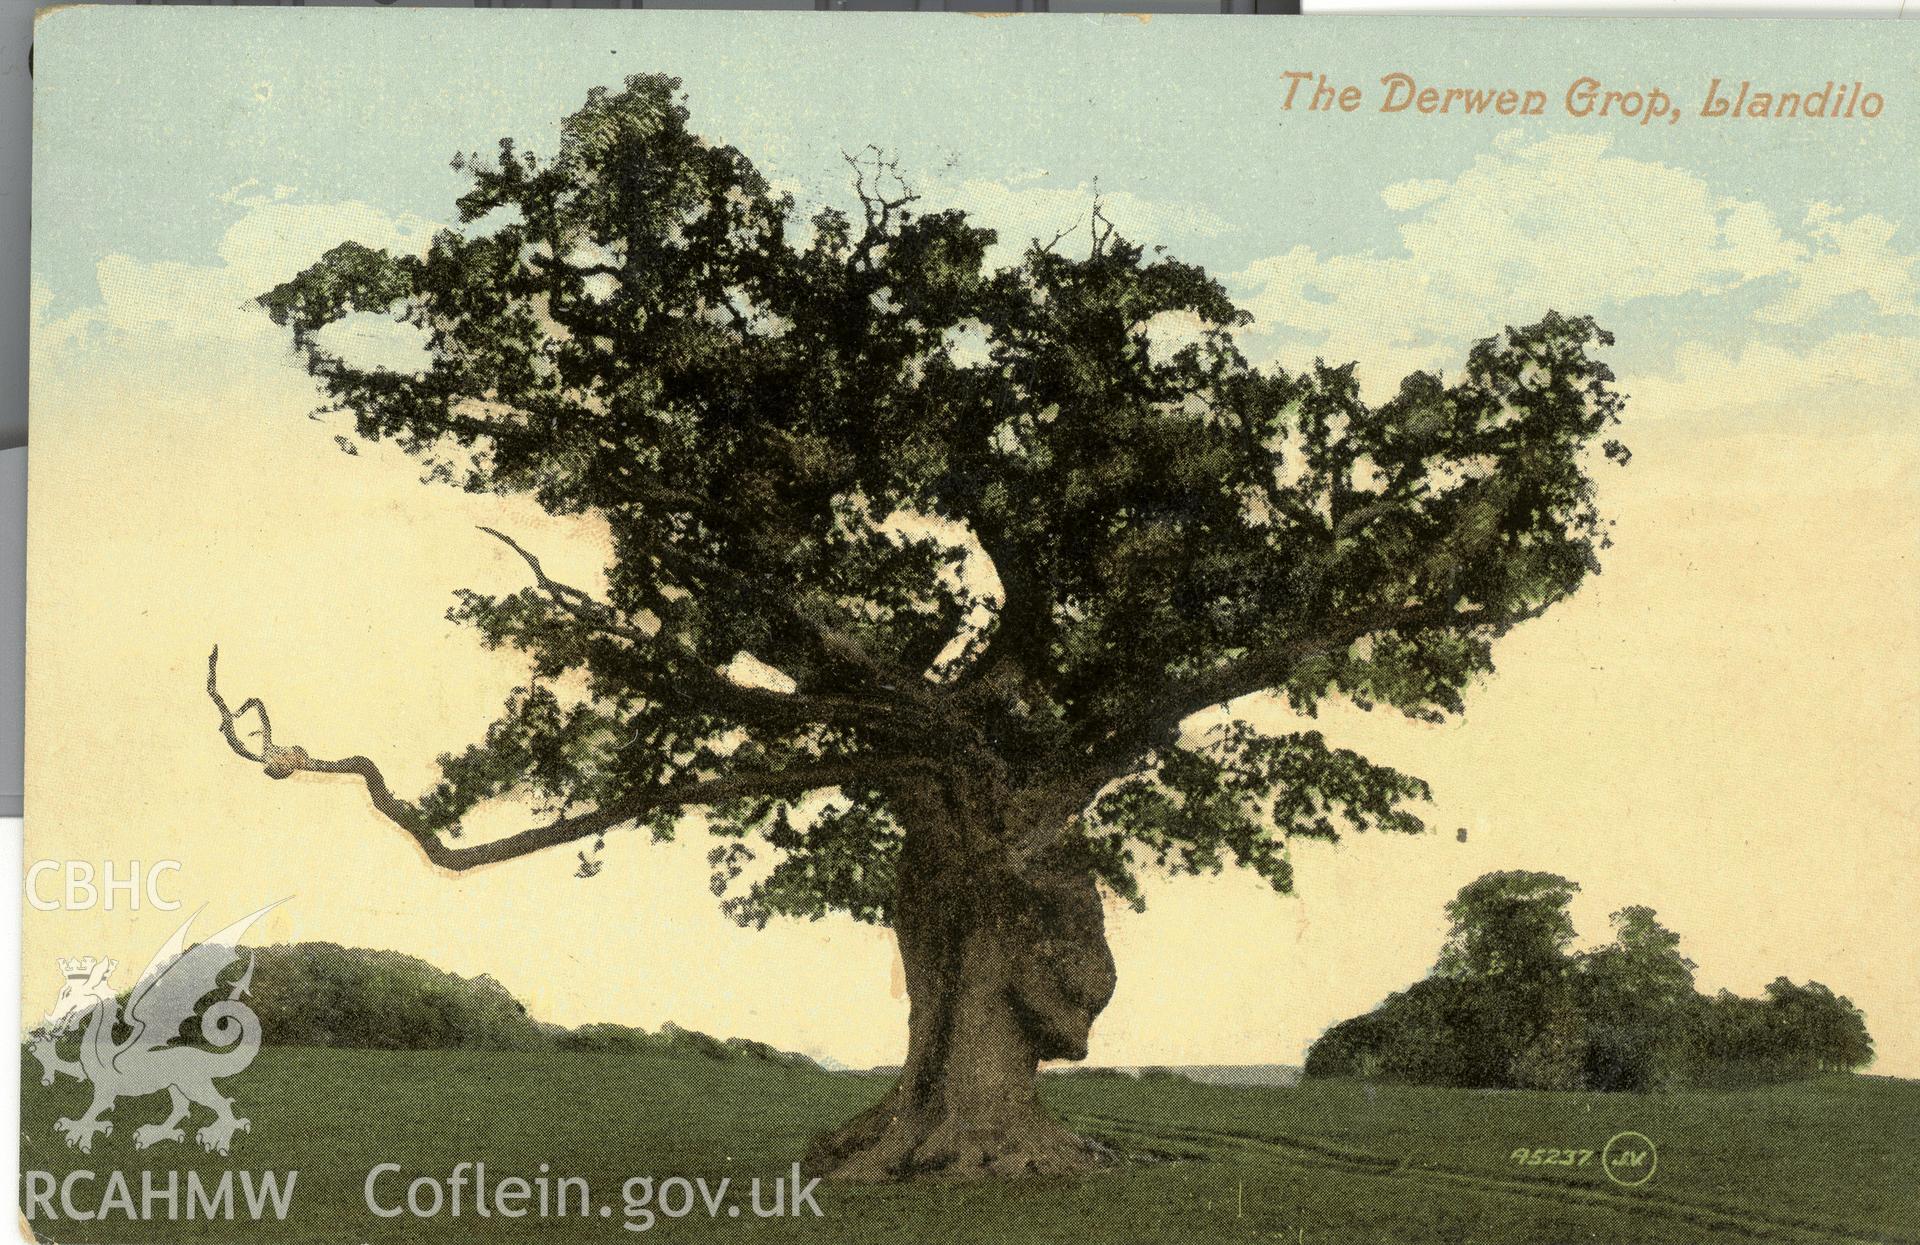 Digitised postcard image of large tree in Dinefor Castle grounds, Llandeilo, Valentine's Series. Produced by Parks and Gardens Data Services, from an original item in the Peter Davis Collection at Parks and Gardens UK. We hold only web-resolution images of this collection, suitable for viewing on screen and for research purposes only. We do not hold the original images, or publication quality scans.